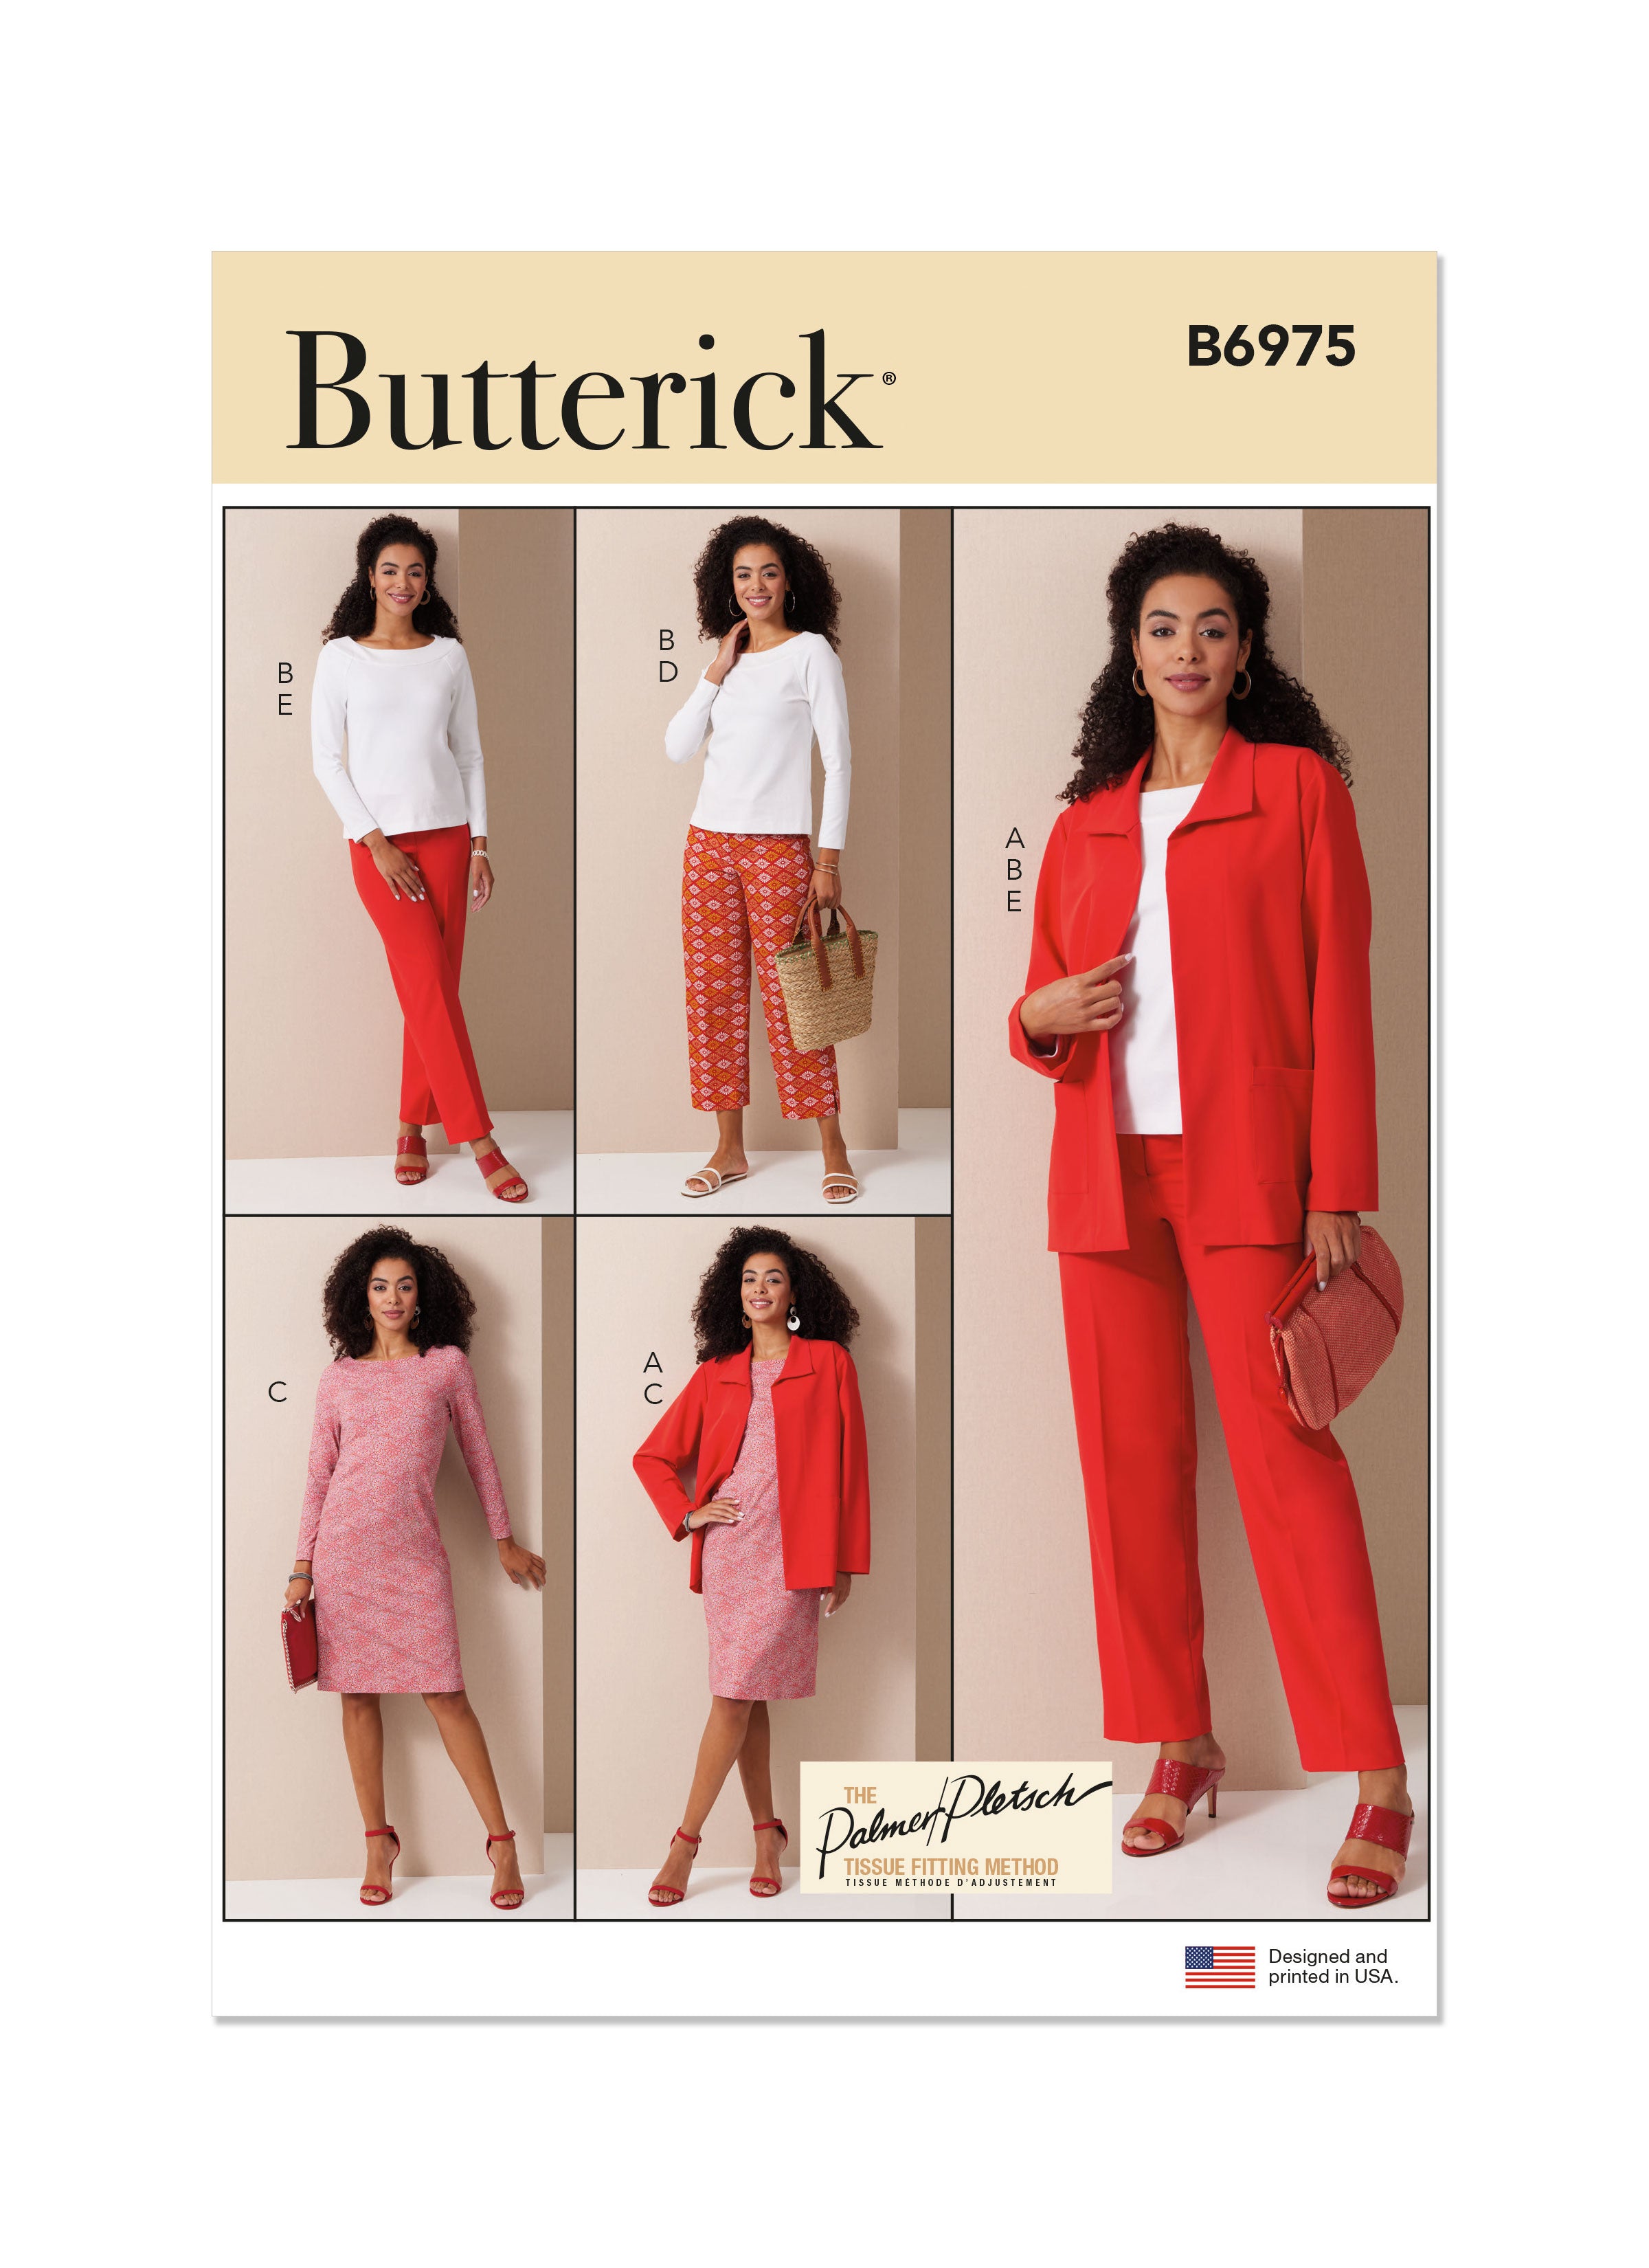 Butterick sewing pattern B6975 Jacket, Top, Dress, and Pants by Palmer/Pletsch from Jaycotts Sewing Supplies